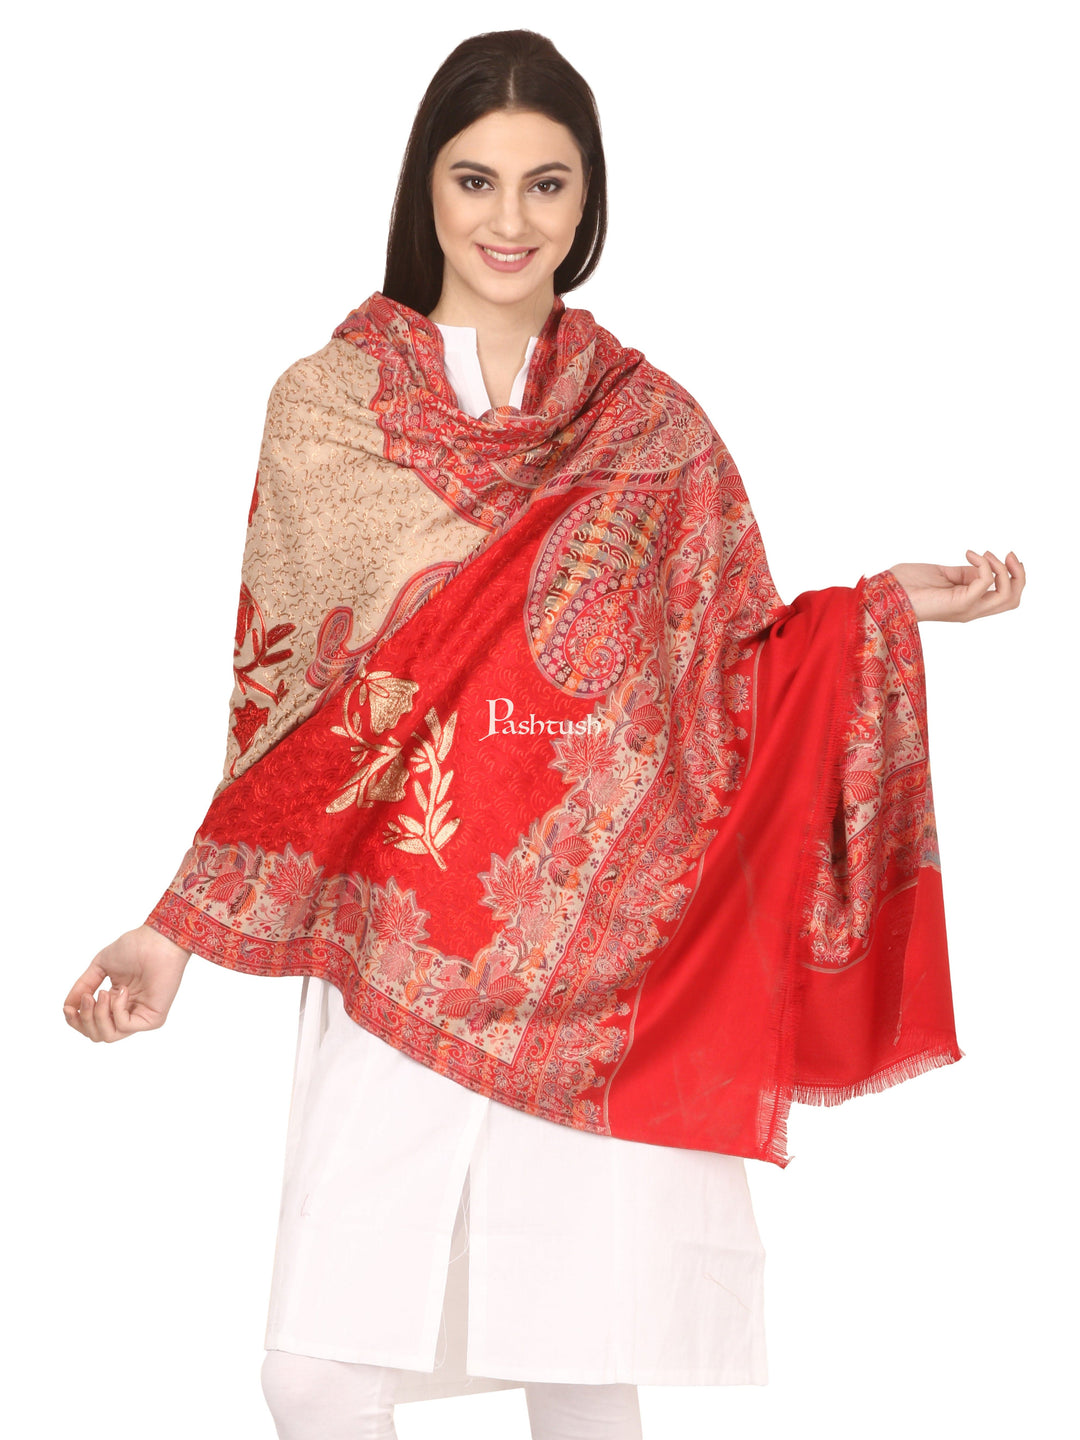 Pashtush India Gift Pack Pashtush His And Her Gift Set Of Fine Ethnic Palla Stole And Shawl With Premium Gift Box Packaging, Black and Beige